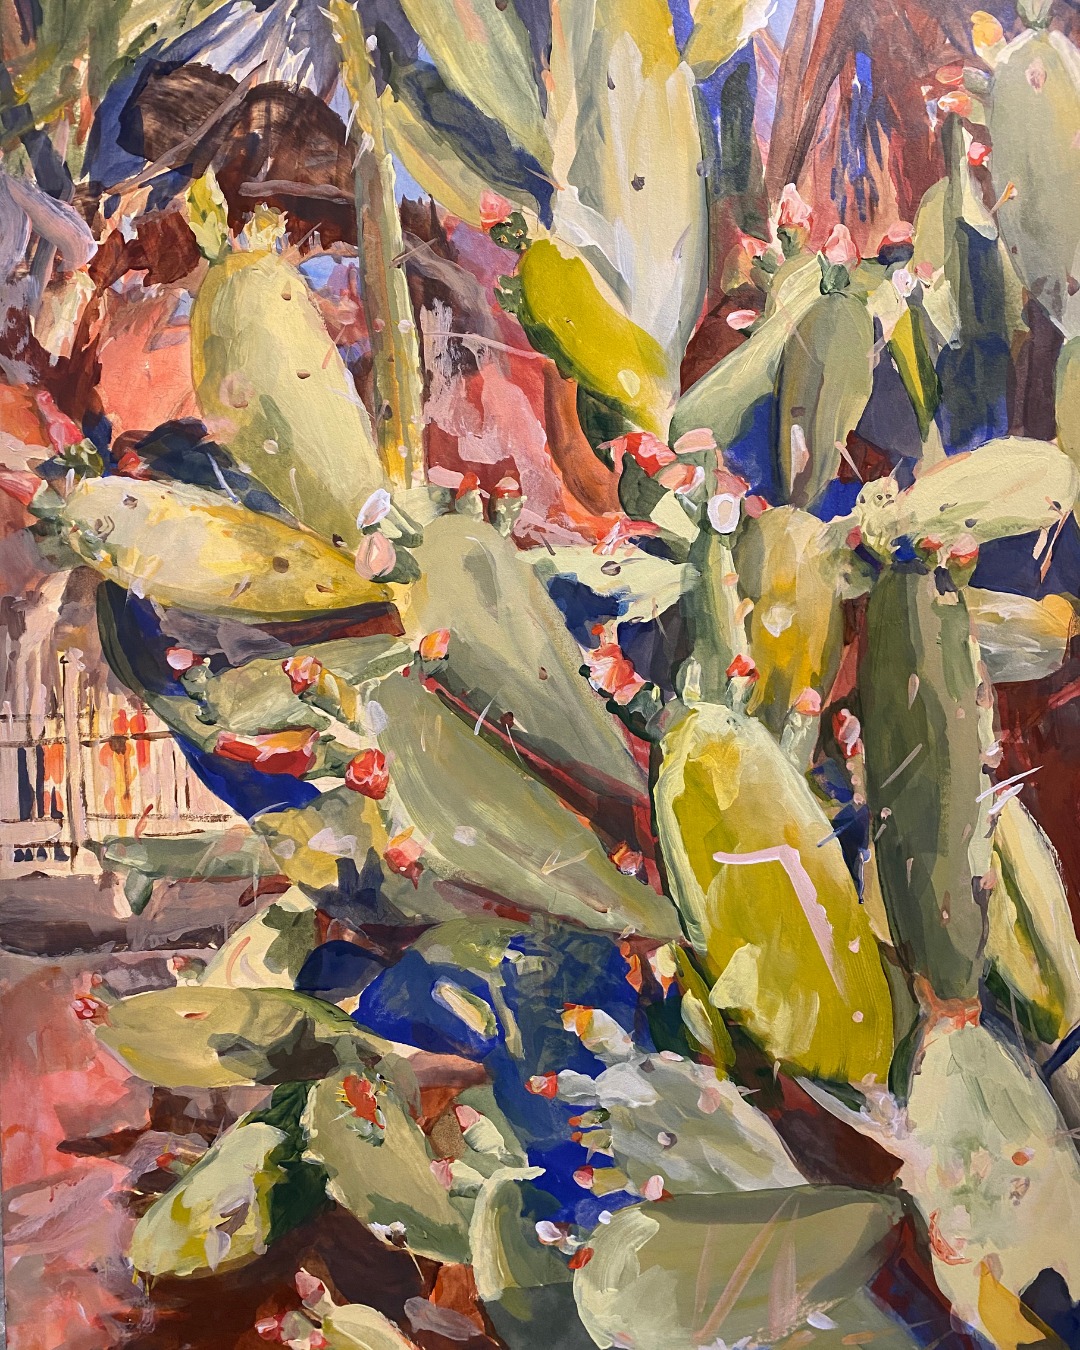 A vibrant oil painting of a group of cacti in a desert landscape, featuring green cactus pads with blooming white and pink flowers, set against a backdrop of rocky terrain with hints of red and brown hues.